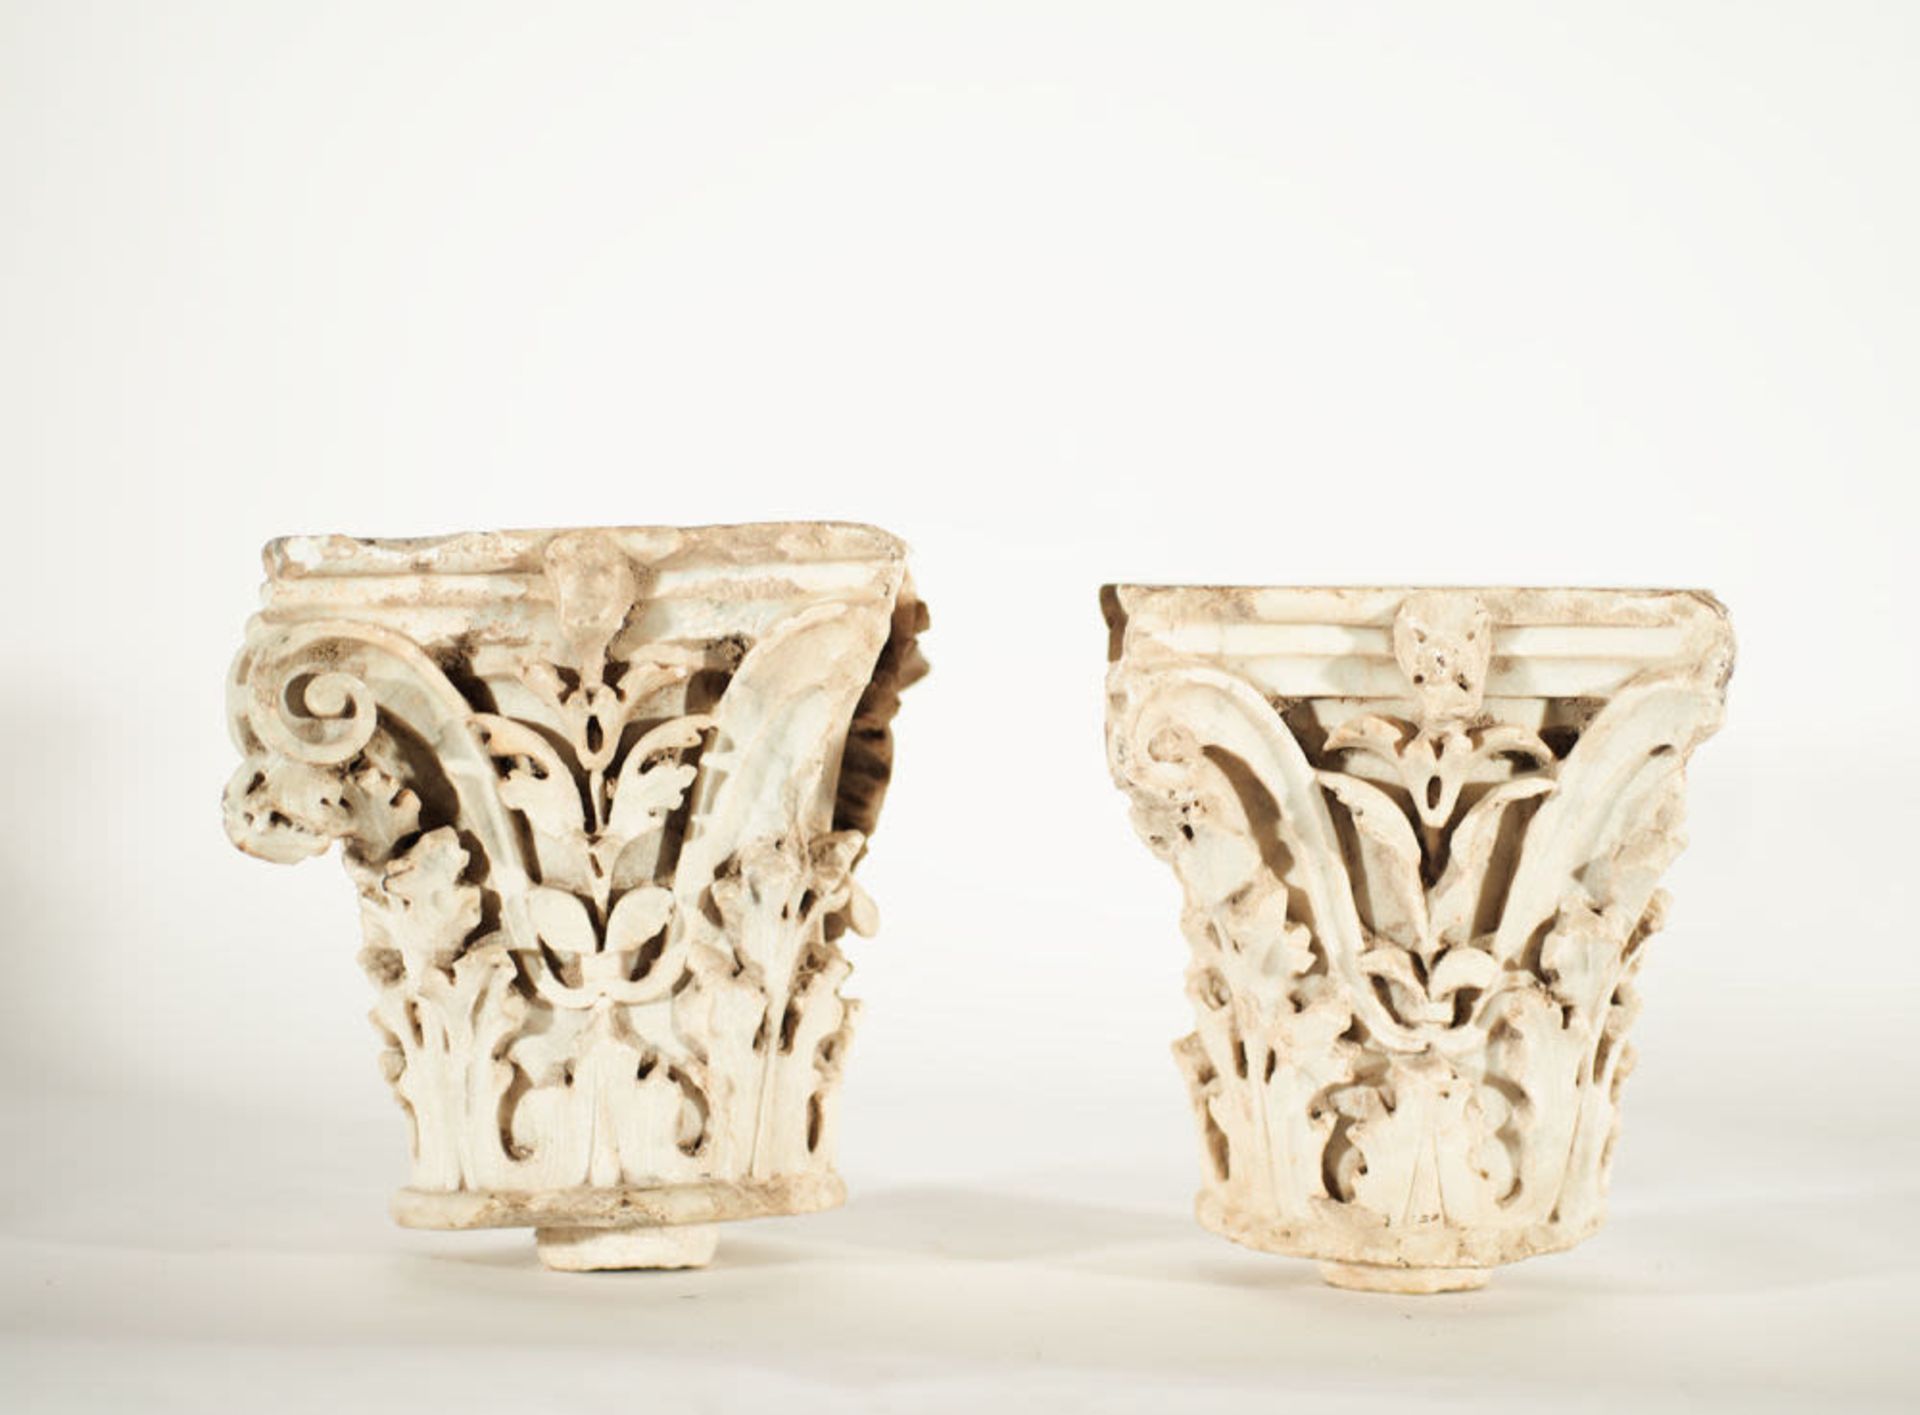 Magnificent Pair of Corinthian Capitals in white marble, possibly Italian and 14th - 15th centuries